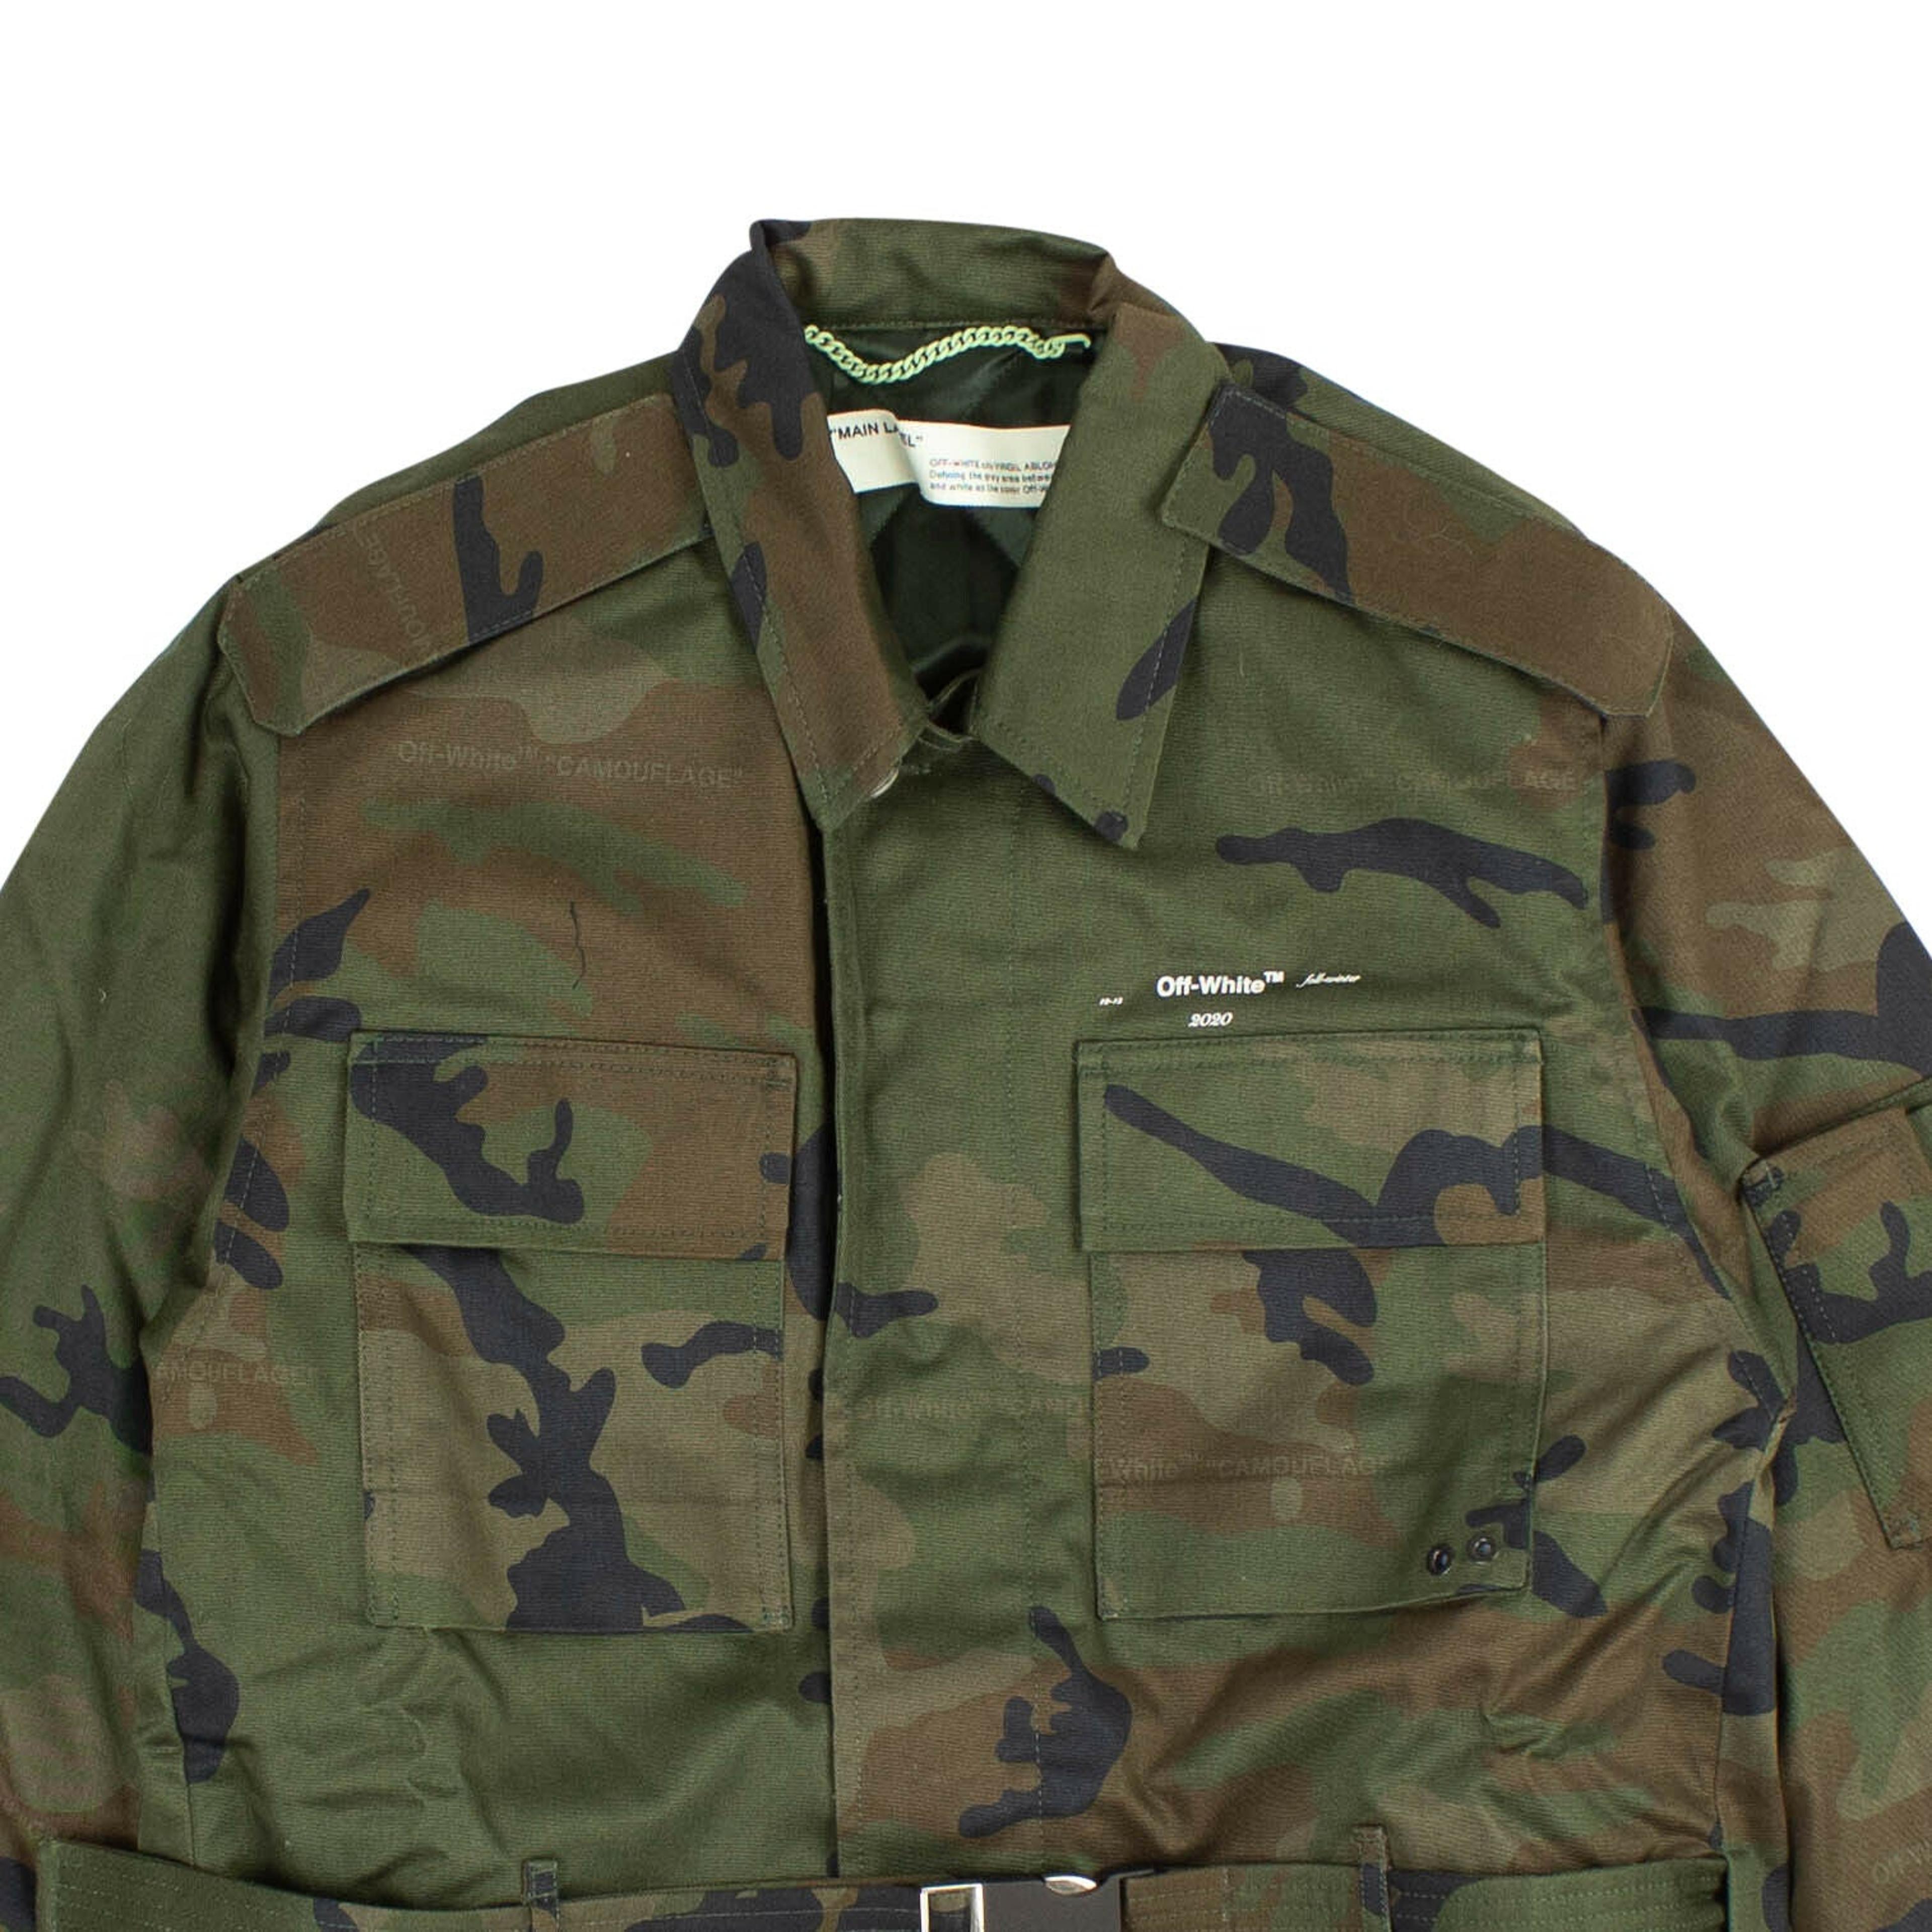 Alternate View 2 of Green Camouflage Field Jacket